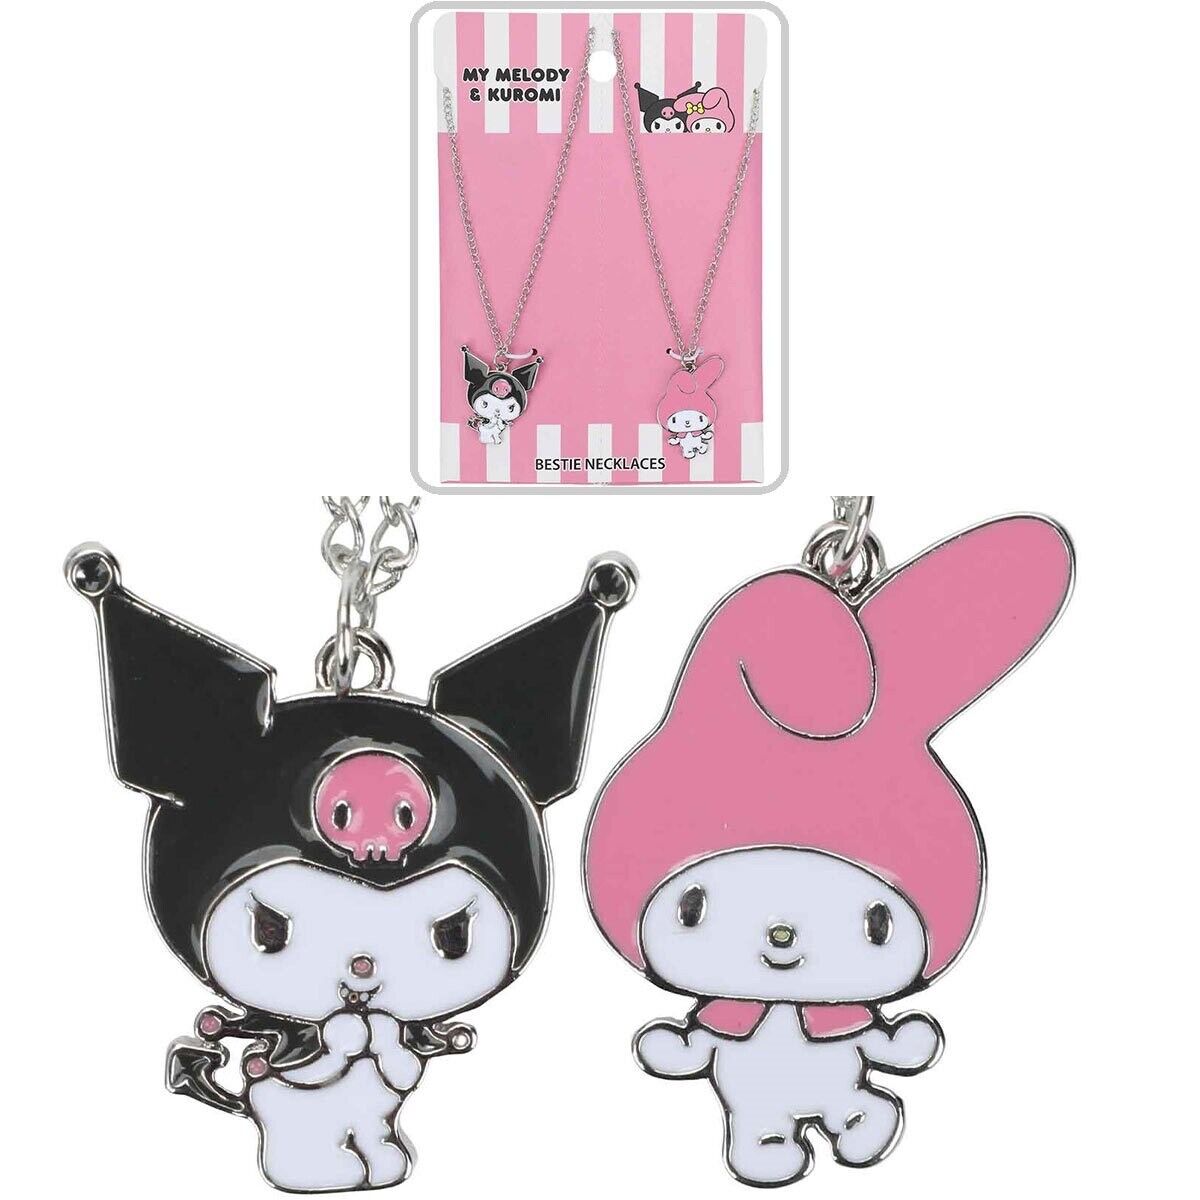 BIOWORLD • Hello Kitty • Kuromi + My Melody Best Friends Necklaces • Ships Free